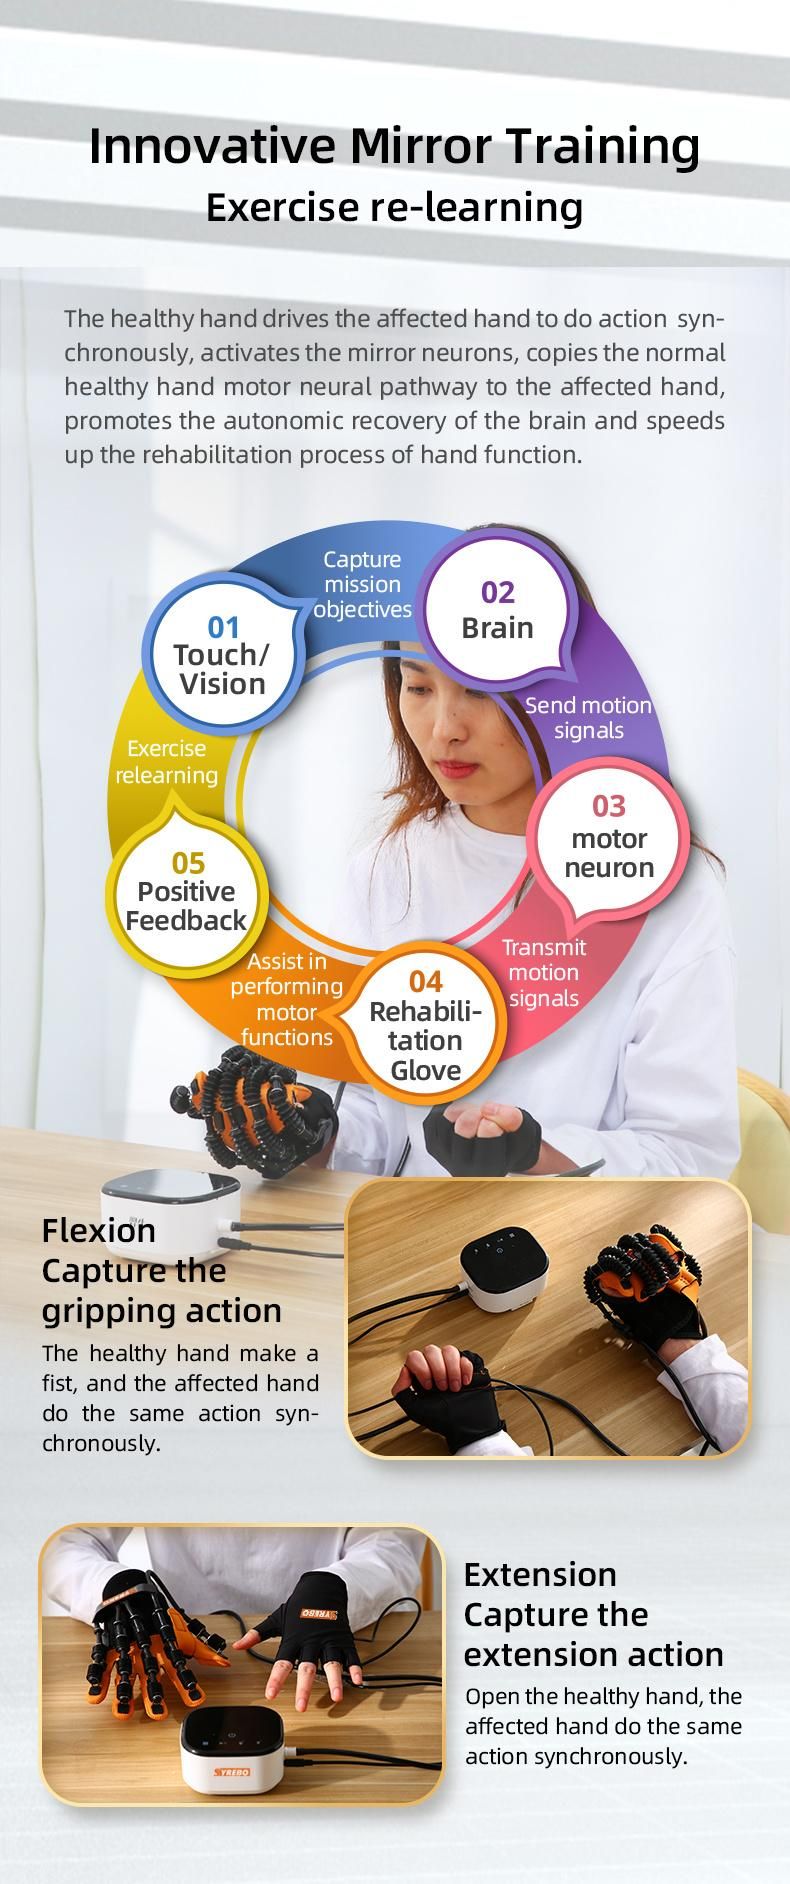 Stroke Rehabilitation Home Occupational Therapy Hand Recover Robotic Glove Equipment